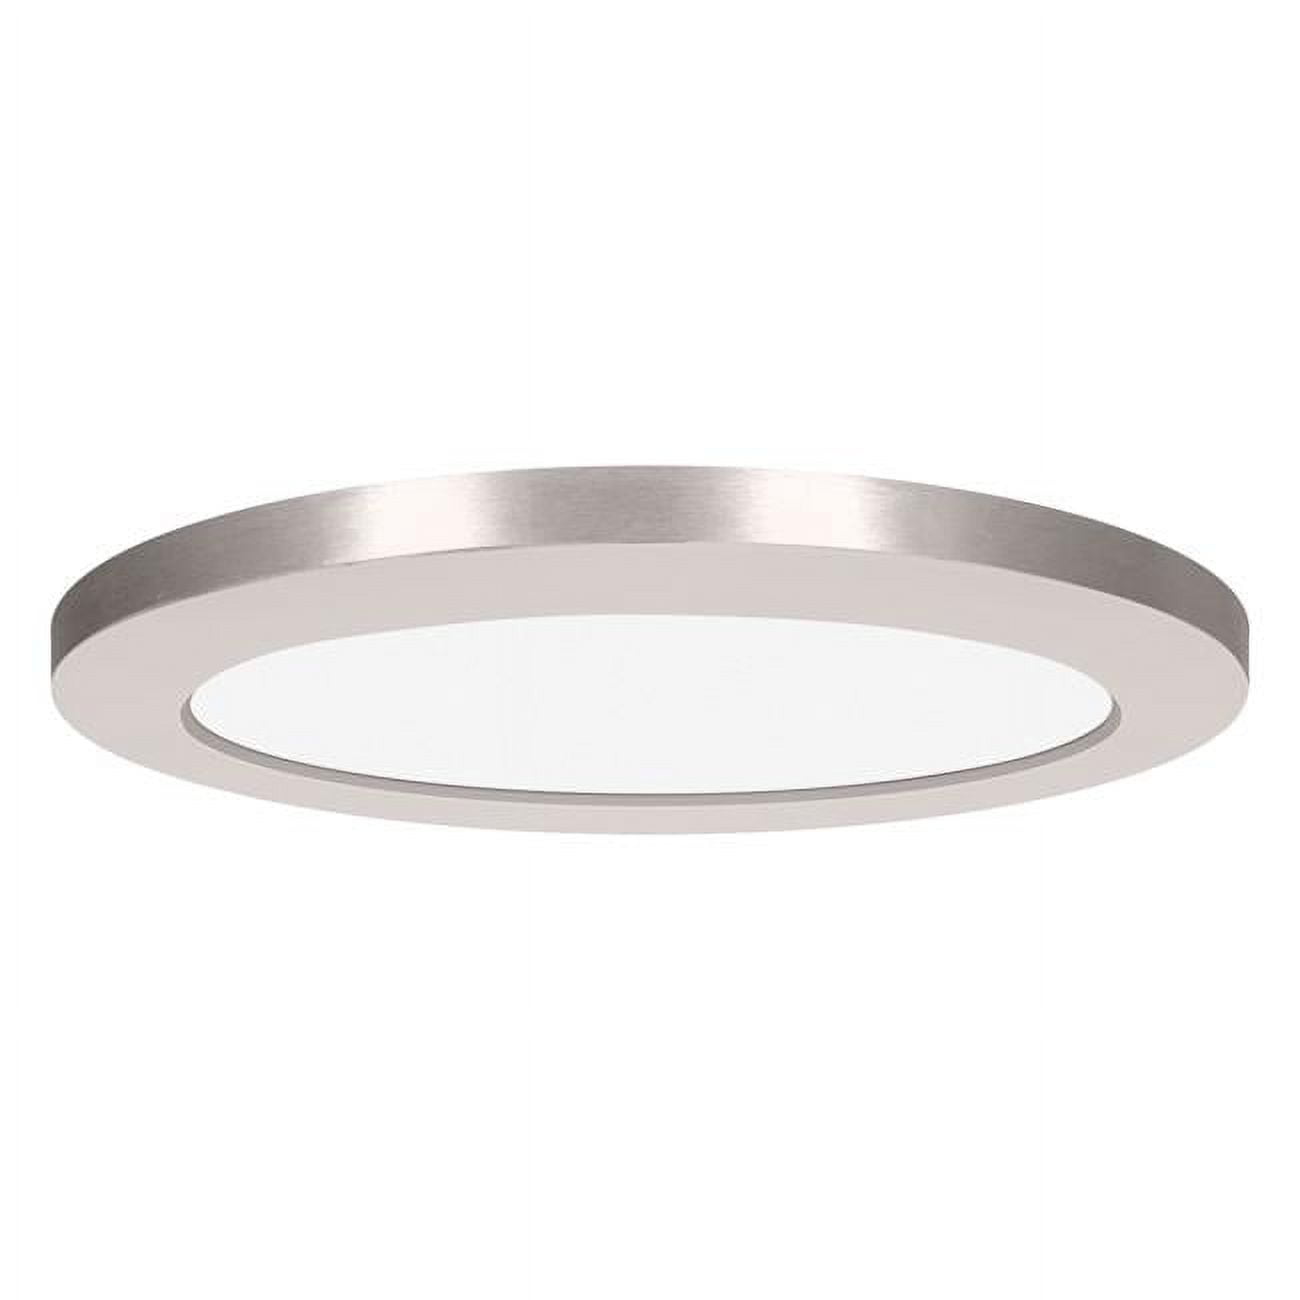 Picture of Access Lighting 20830TRIM-BS 12 in. ModPLUS Brushed Steel Trim Recessed for 20830 & 20836